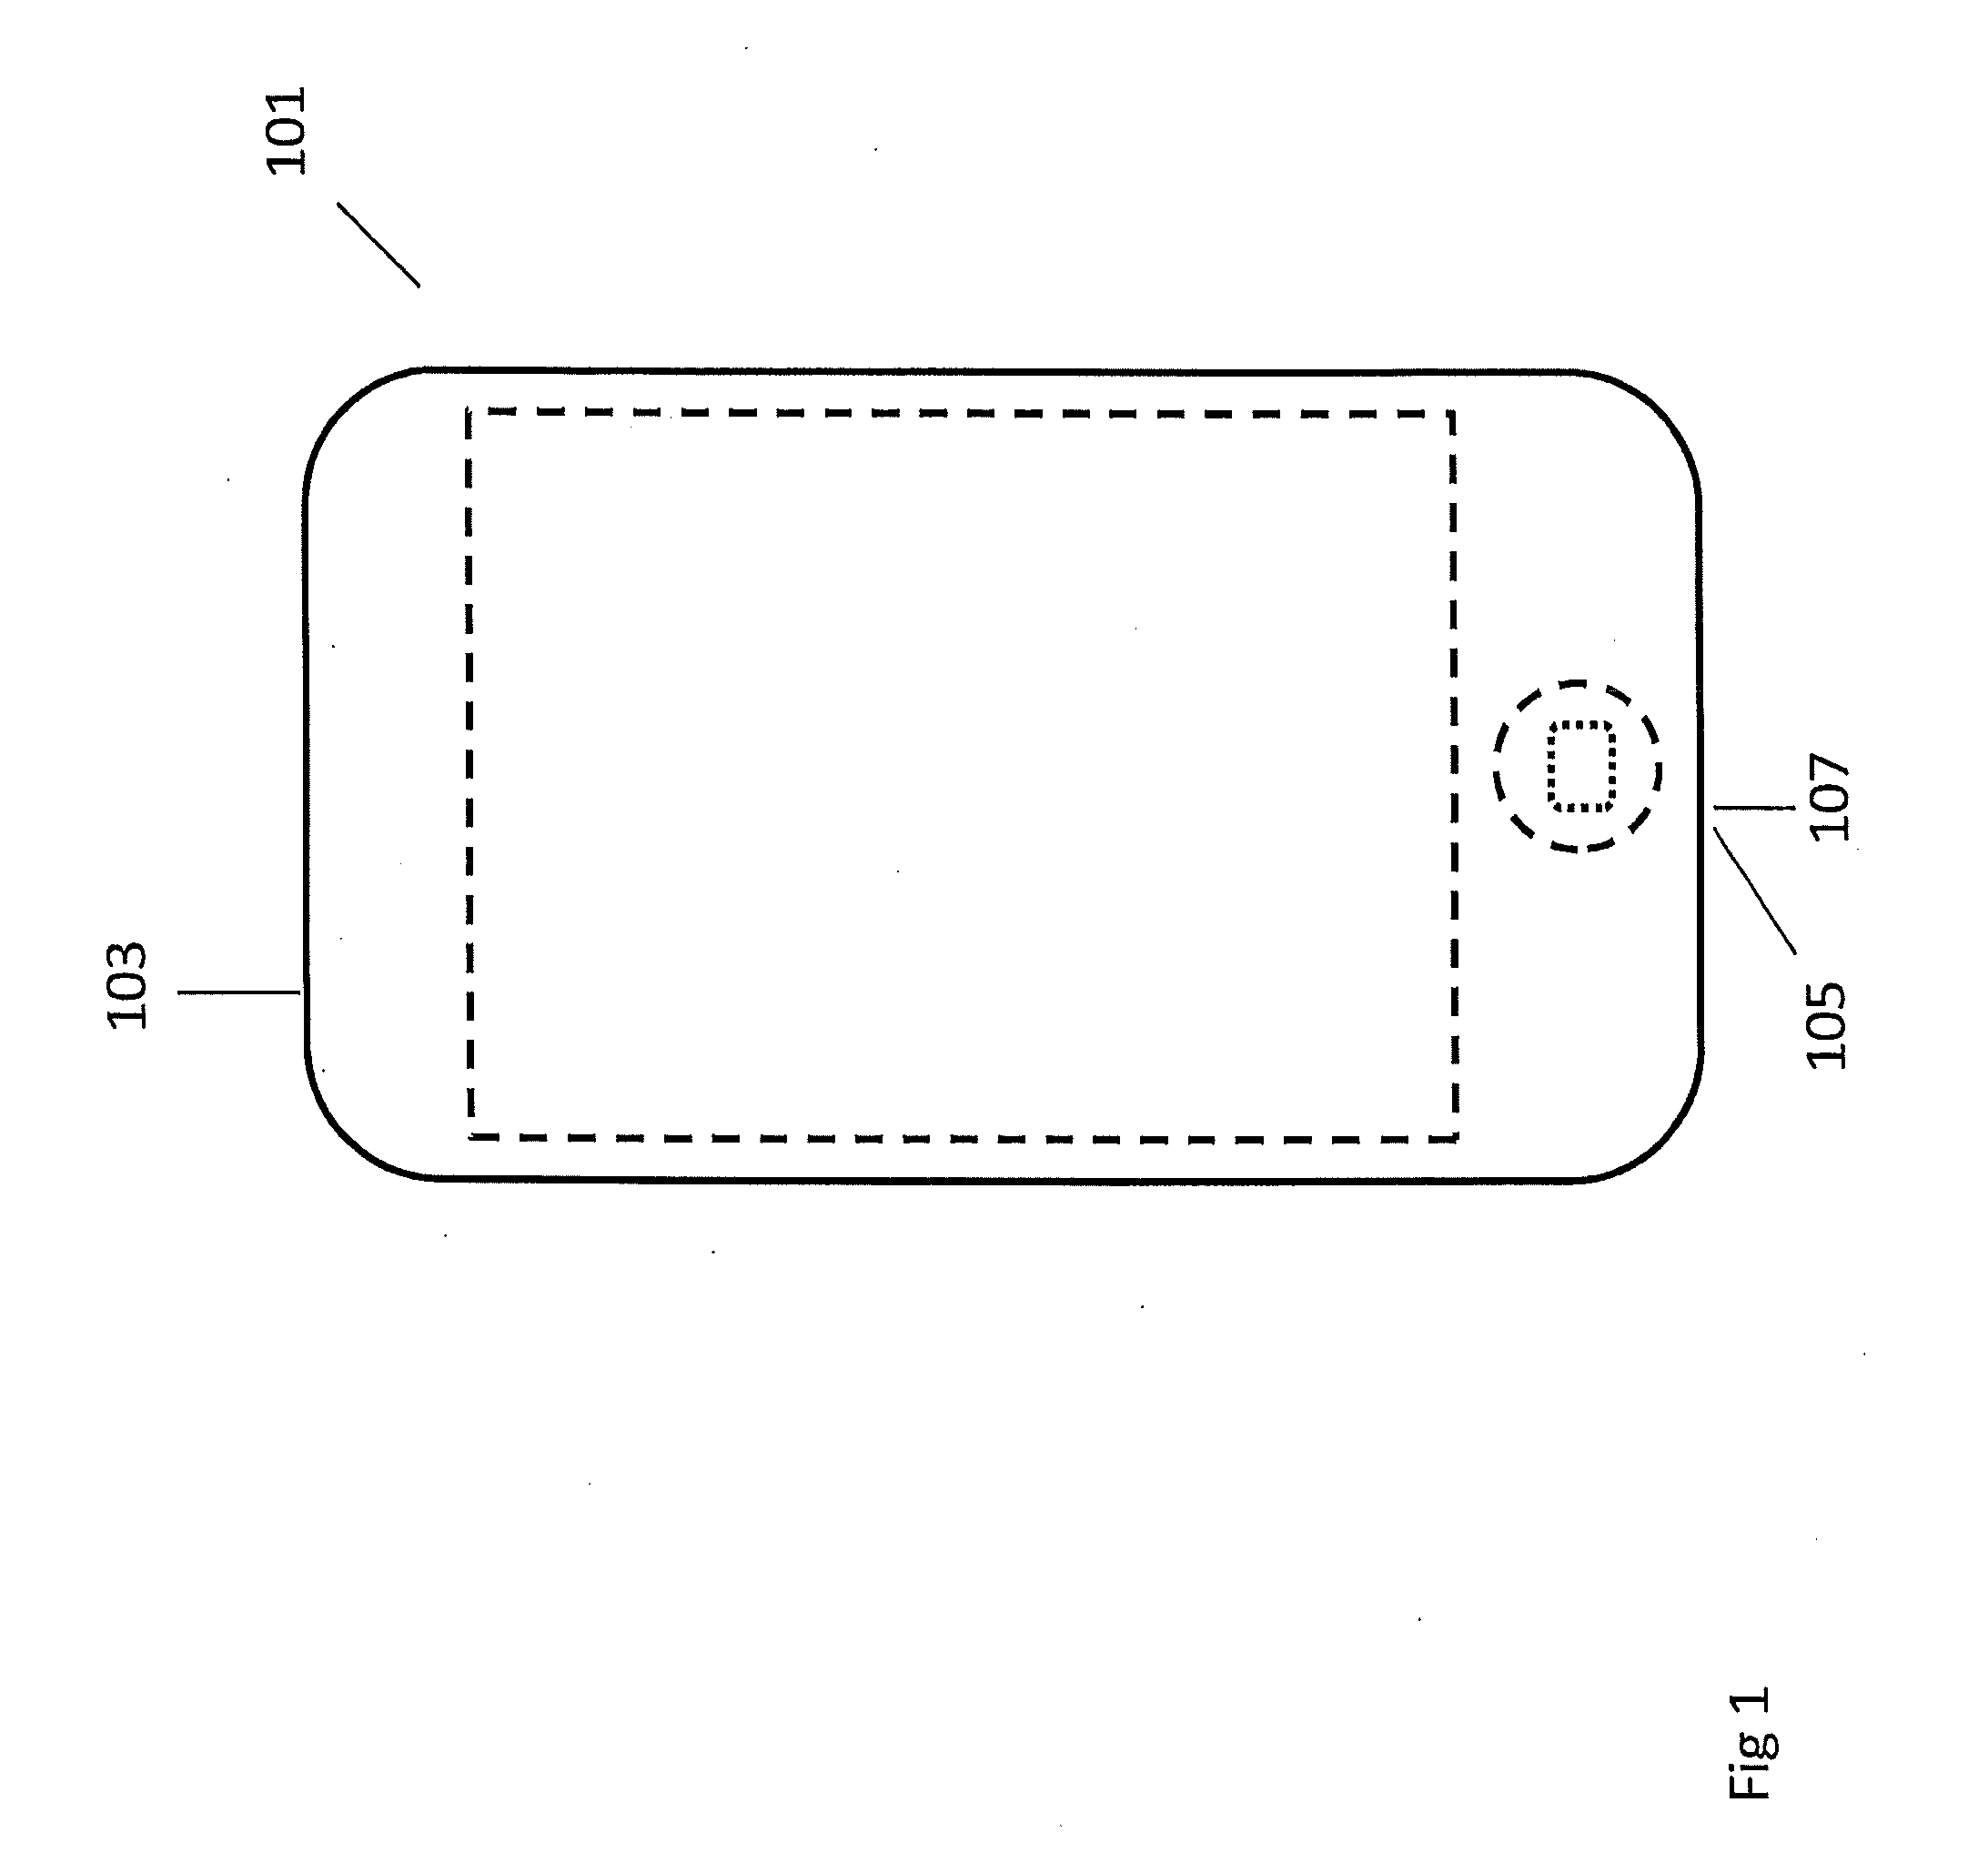 Integrated Blood Glucose Measurement Device